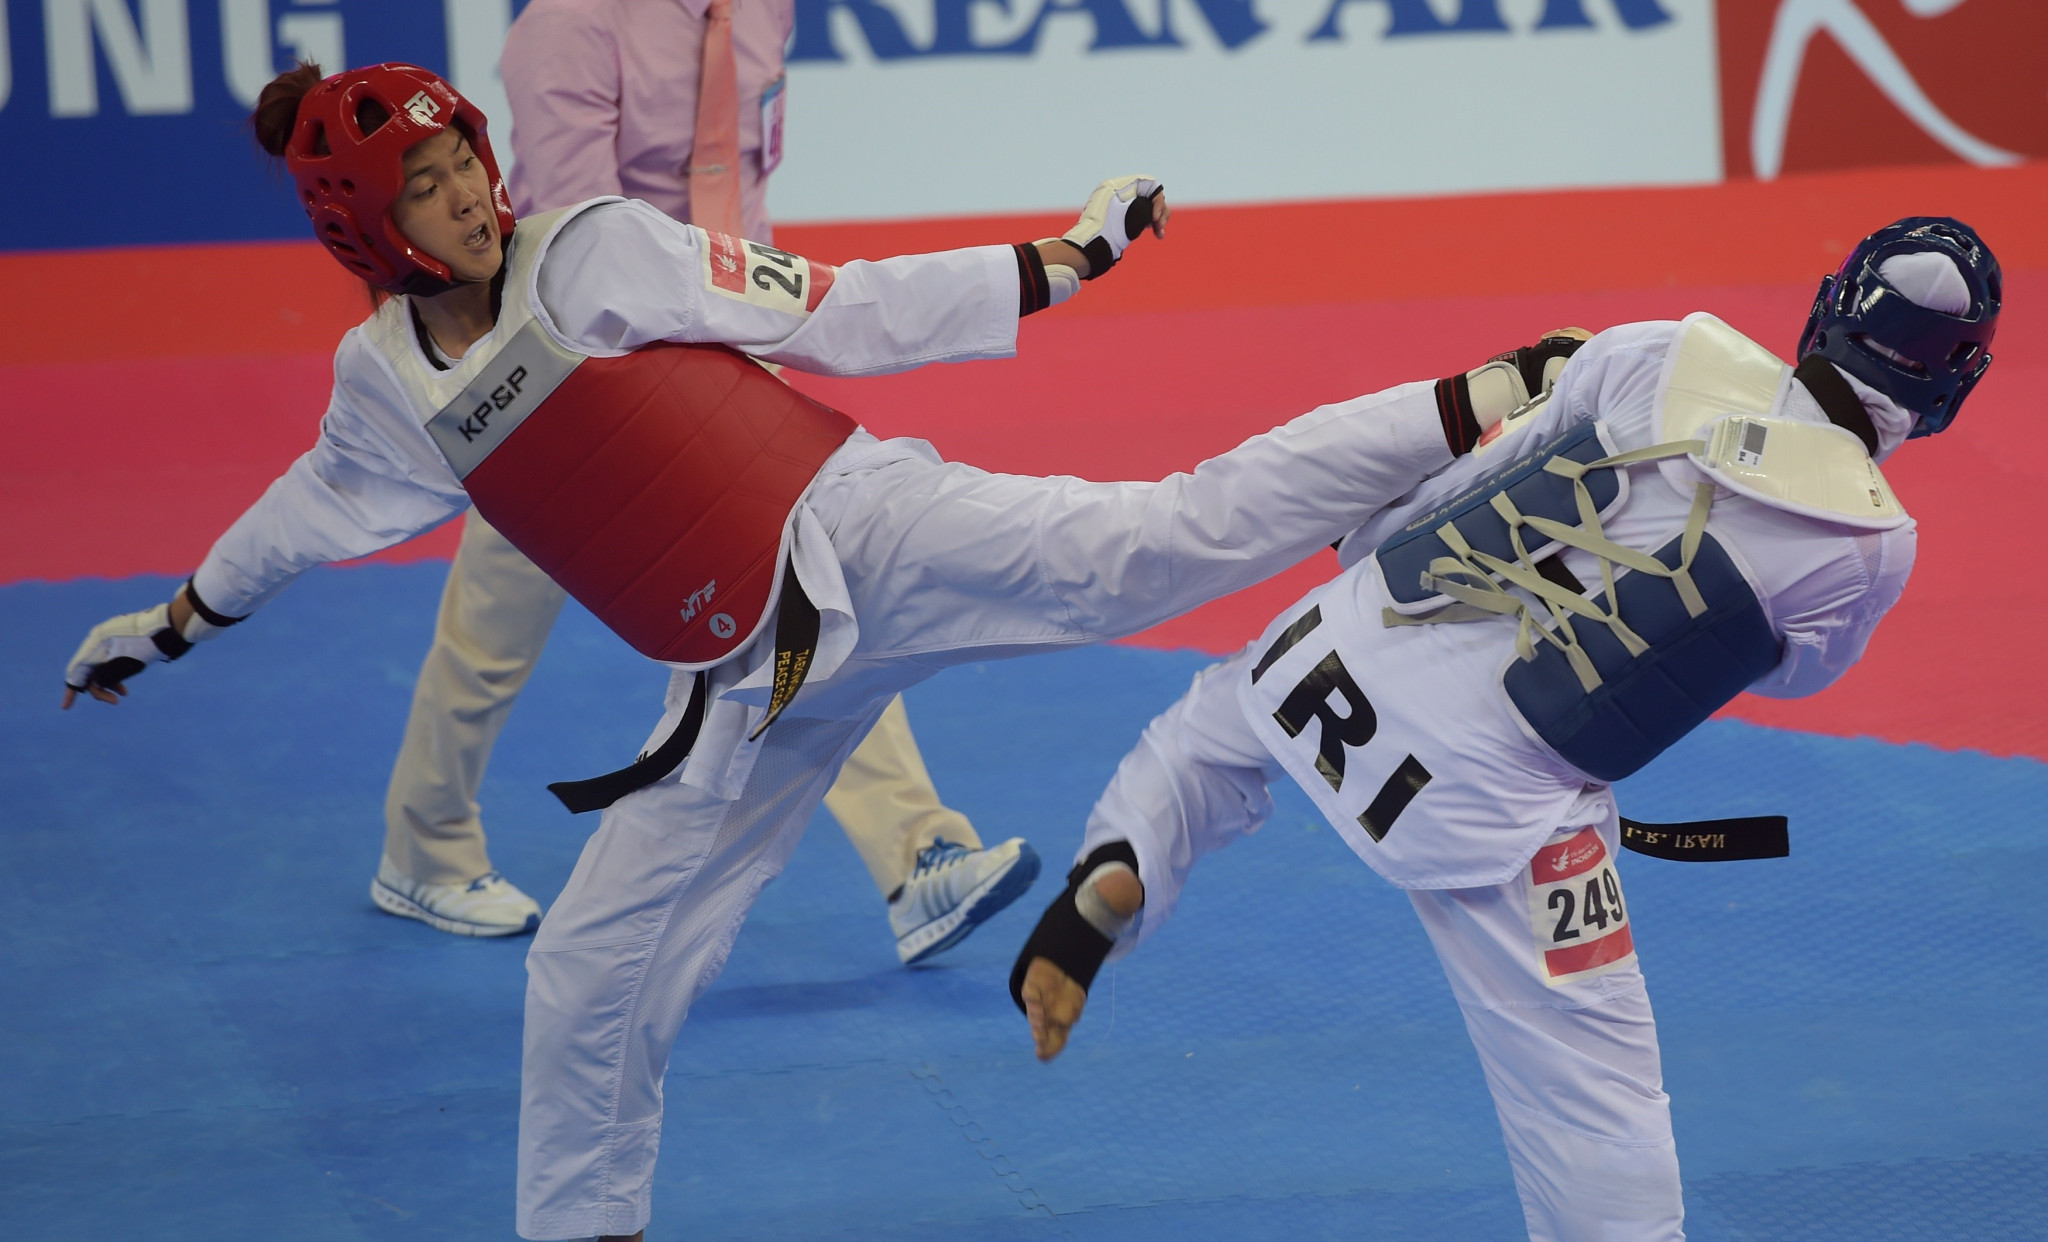 Taekwondo's Seavmey hoping to inspire Cambodians at home Southeast Asian Games